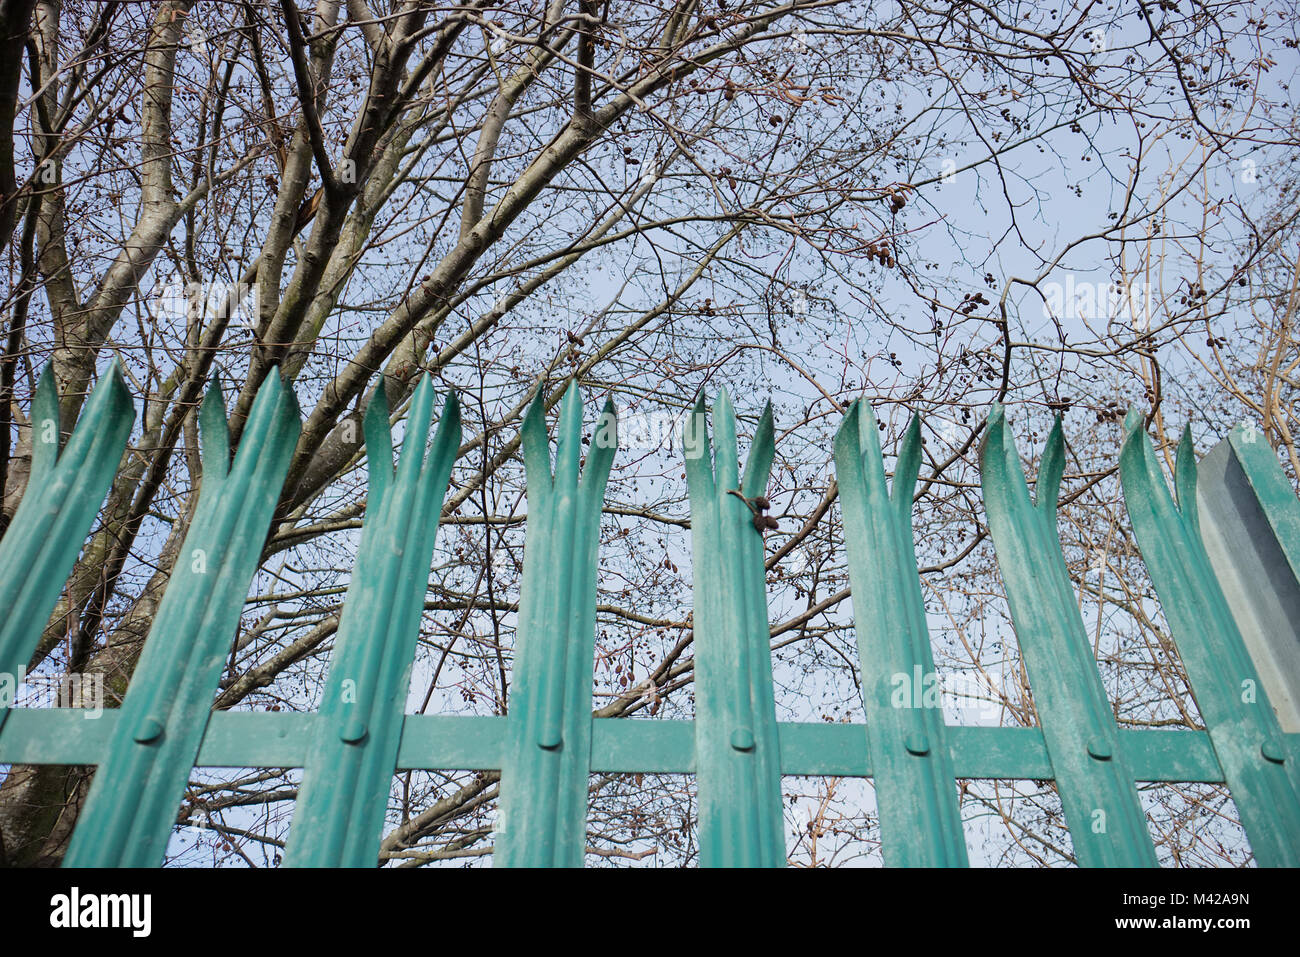 A pretty teal gate surrounded by trees with a blue sky background. The shot was taken close to Edinburgh Park, Scotland. Stock Photo